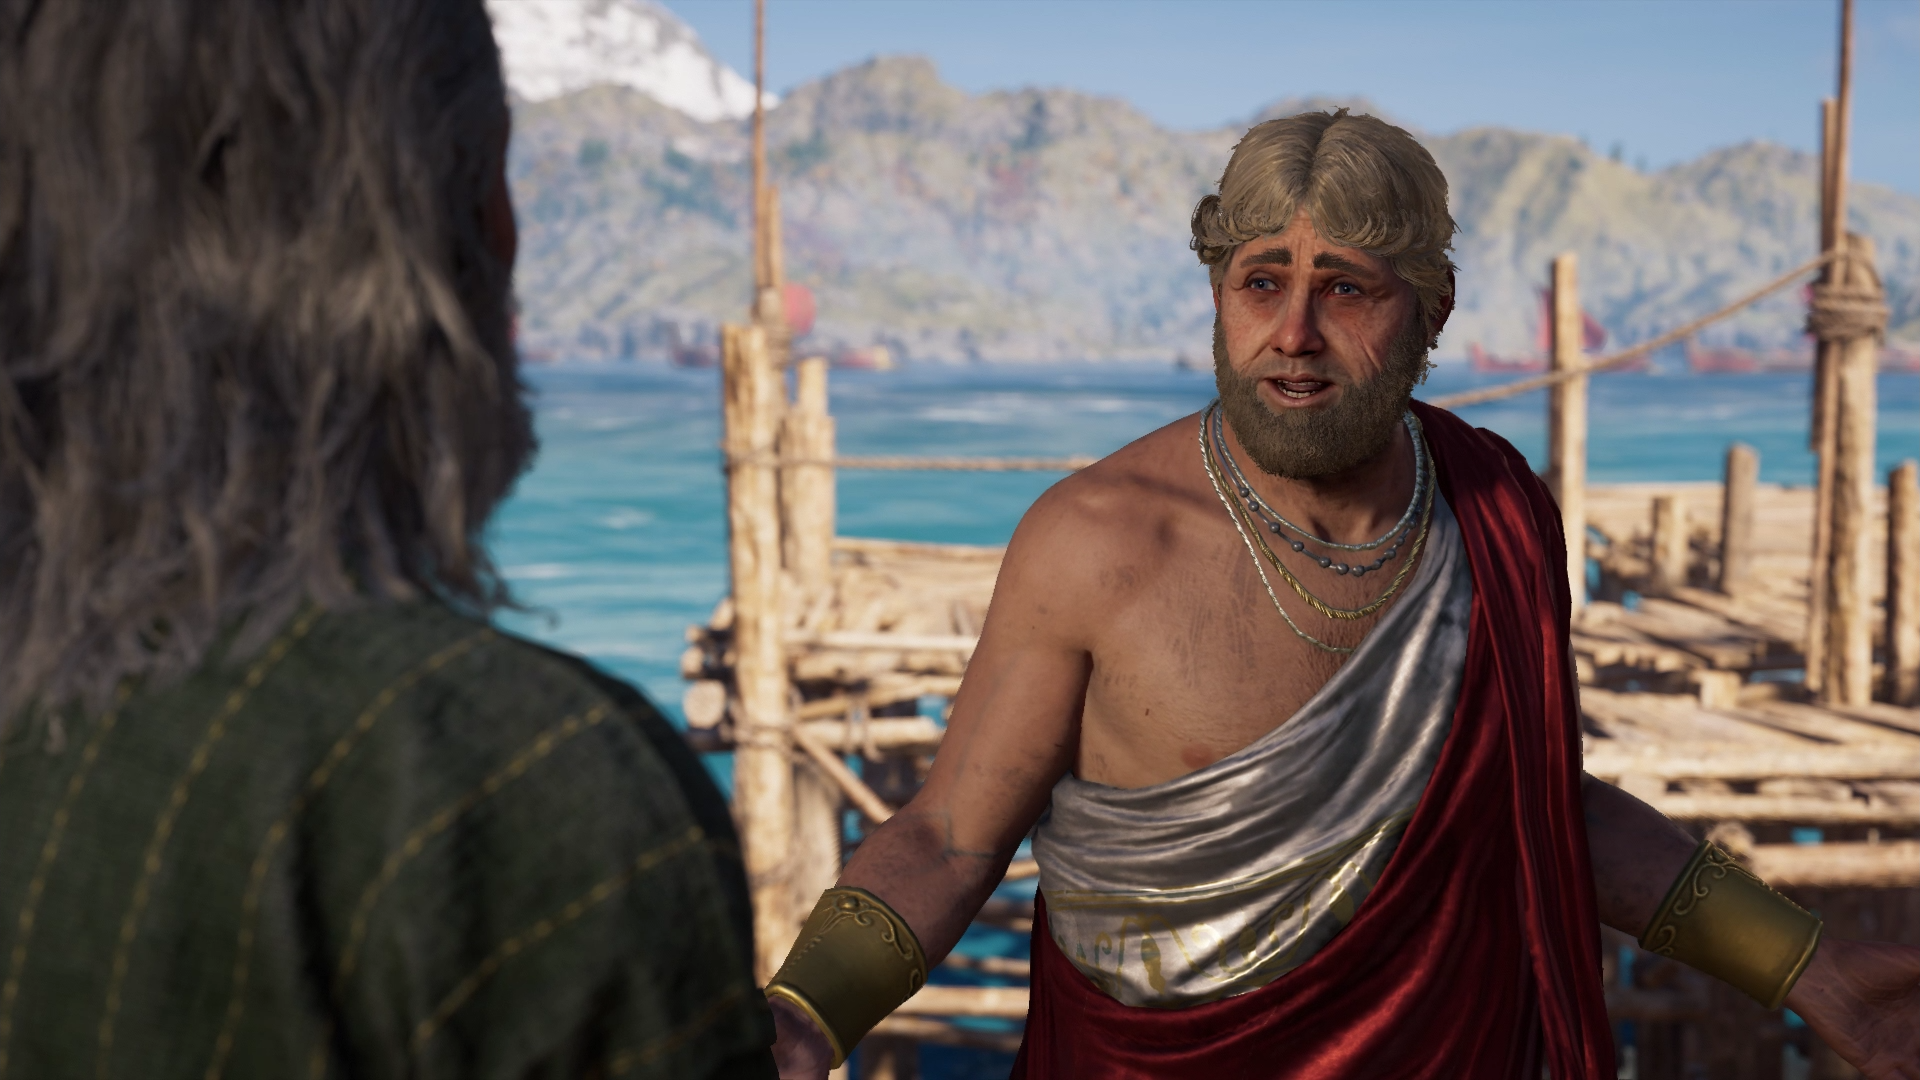 Review: Assassin's Creed Odyssey - A step in a fresh direction » EFTM